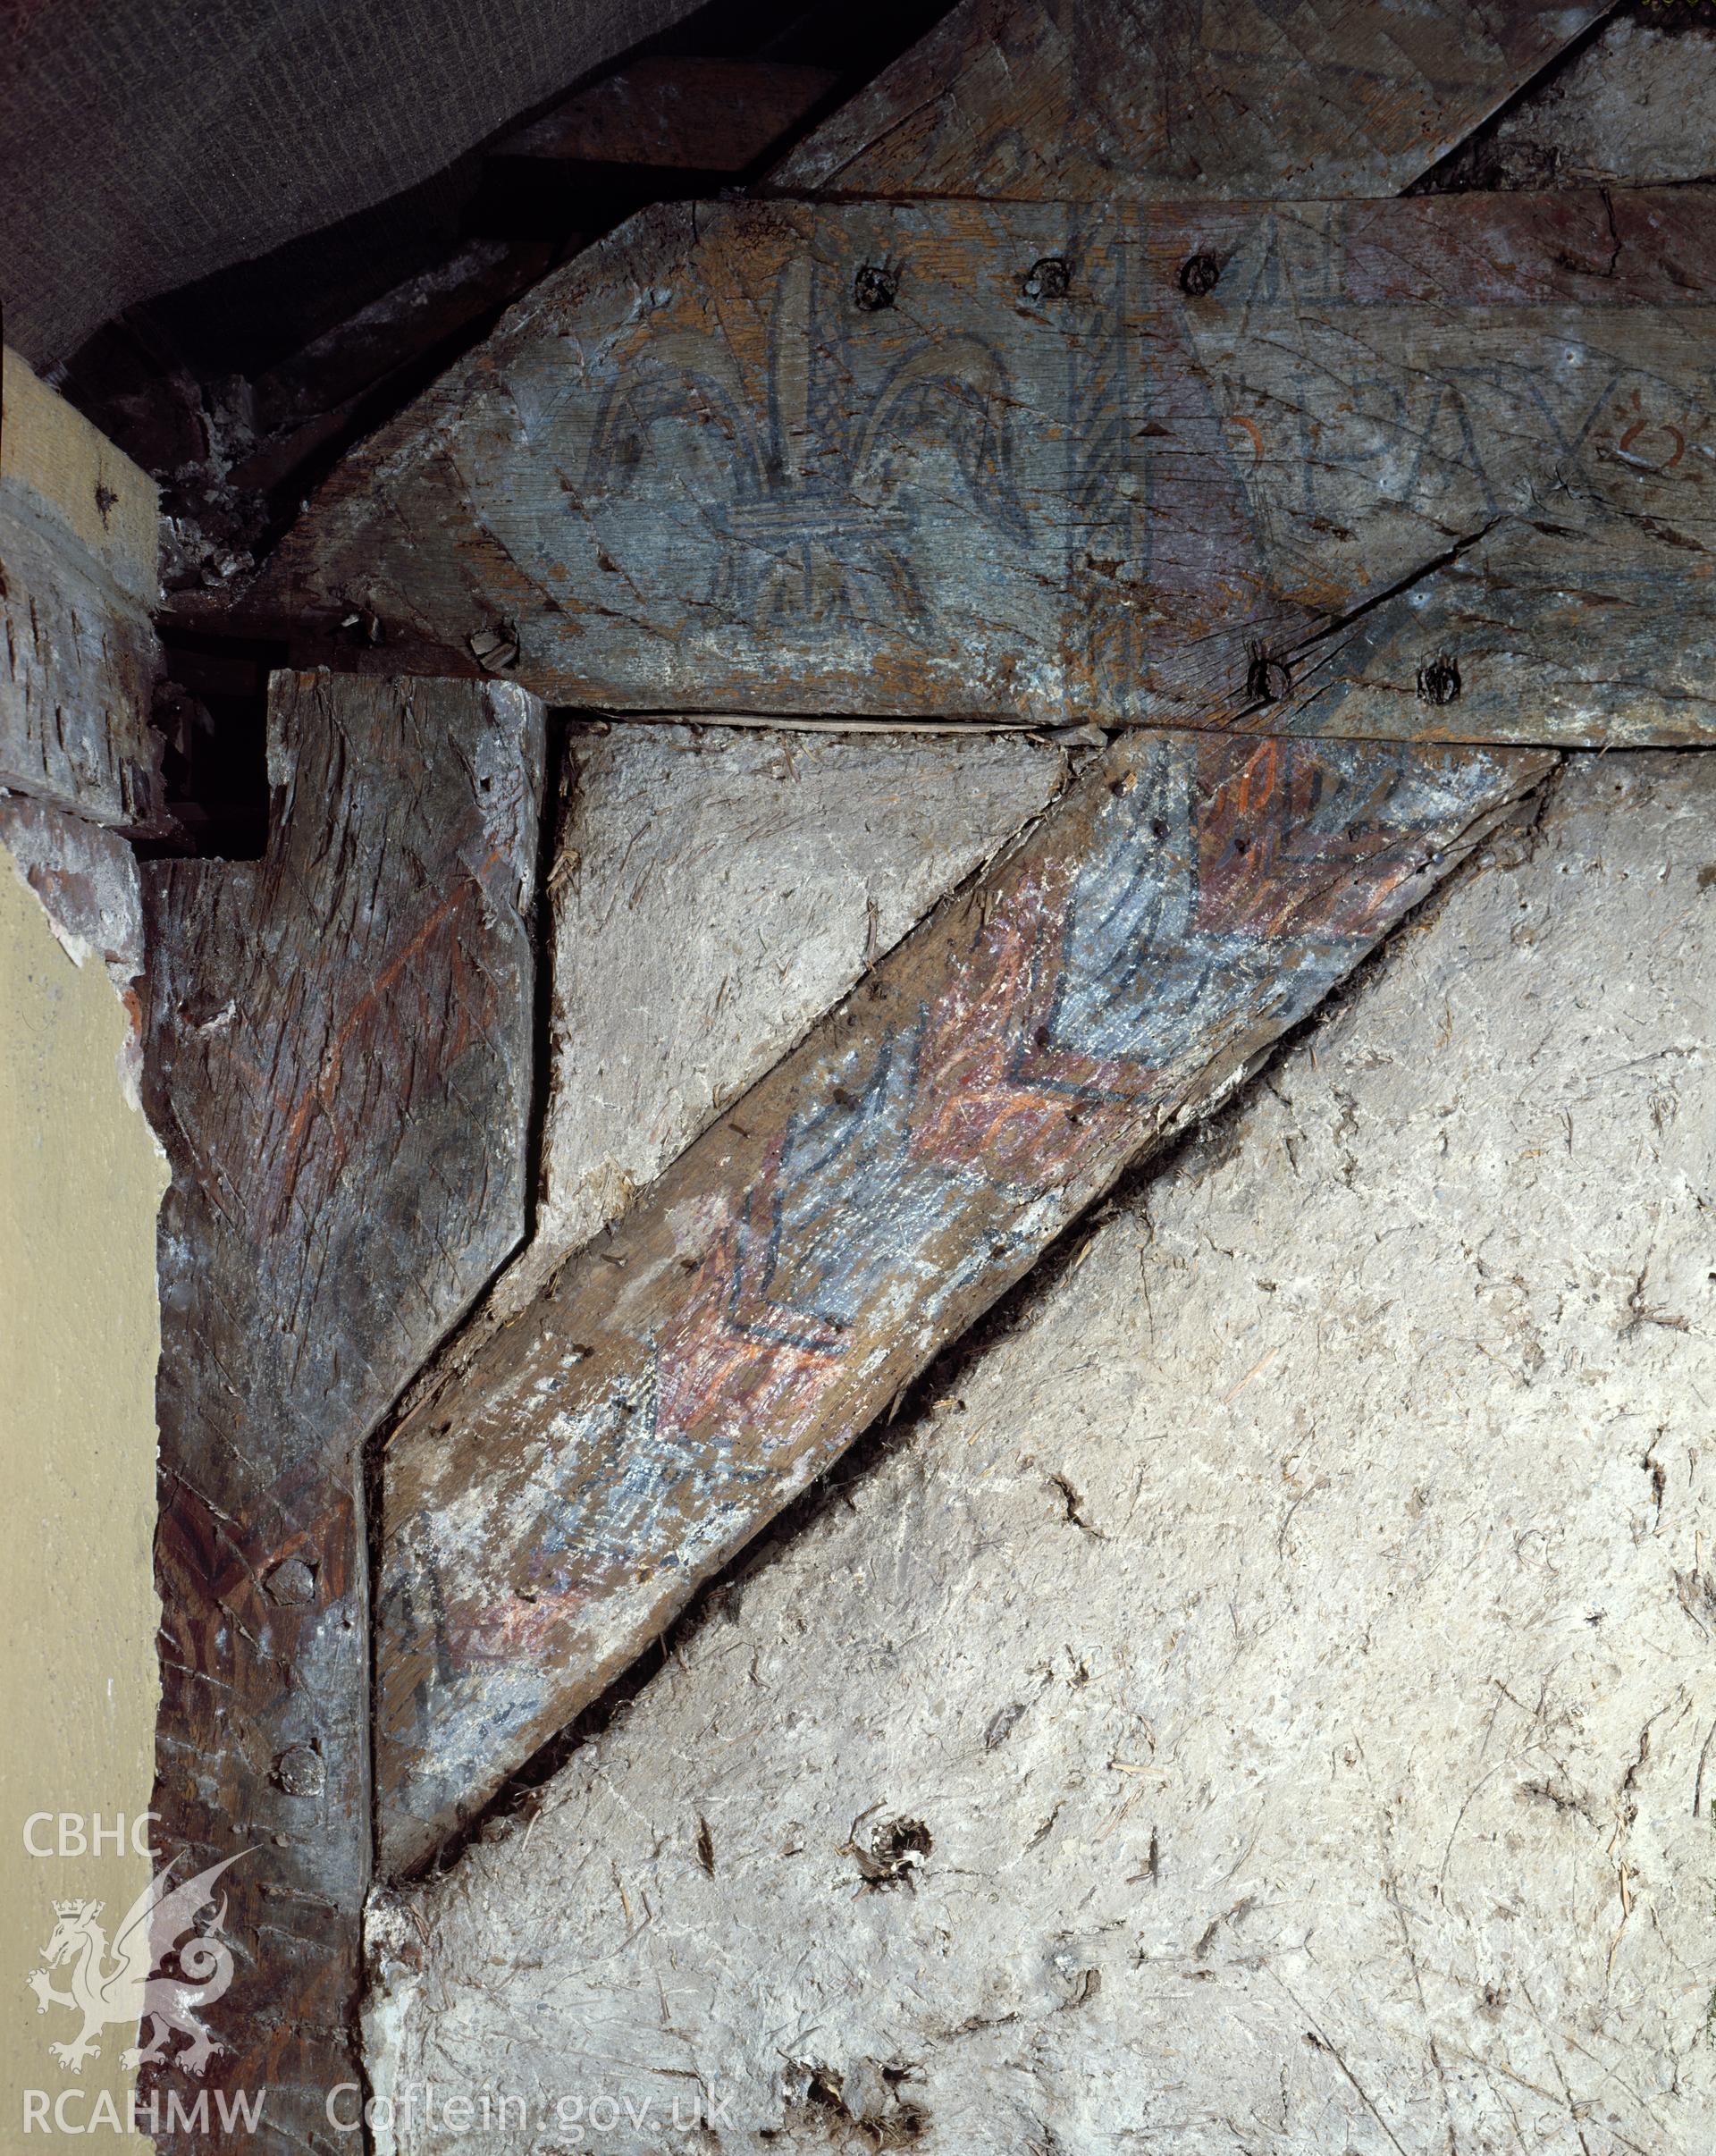 Colour transparency showing wallpaintings at George and Dragon, Beaumaris.